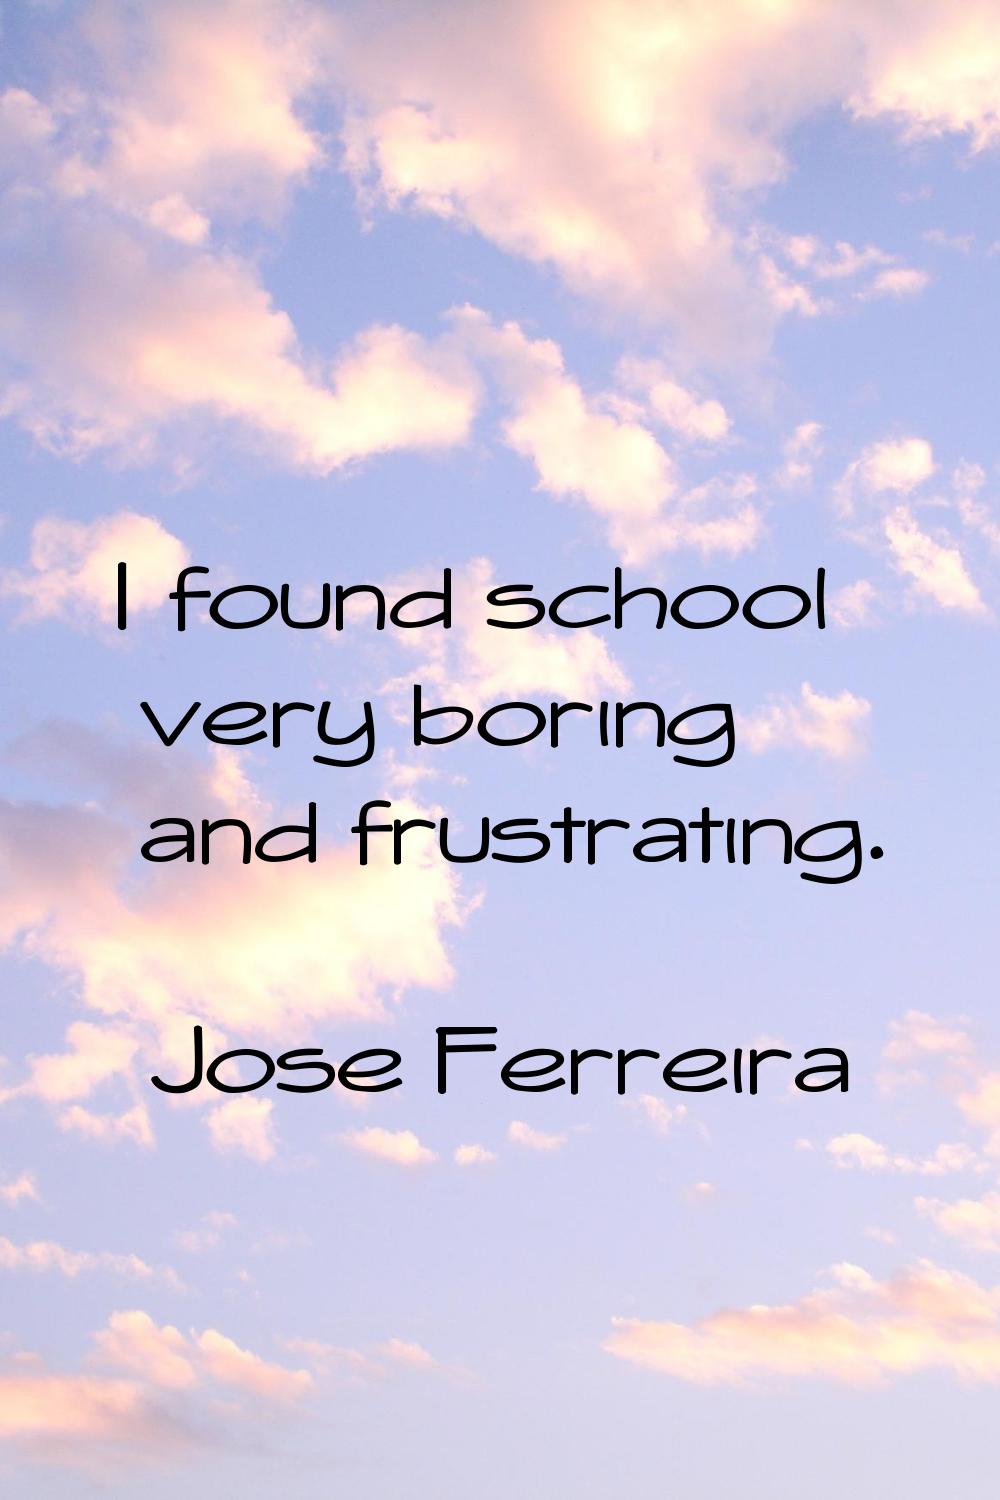 I found school very boring and frustrating.